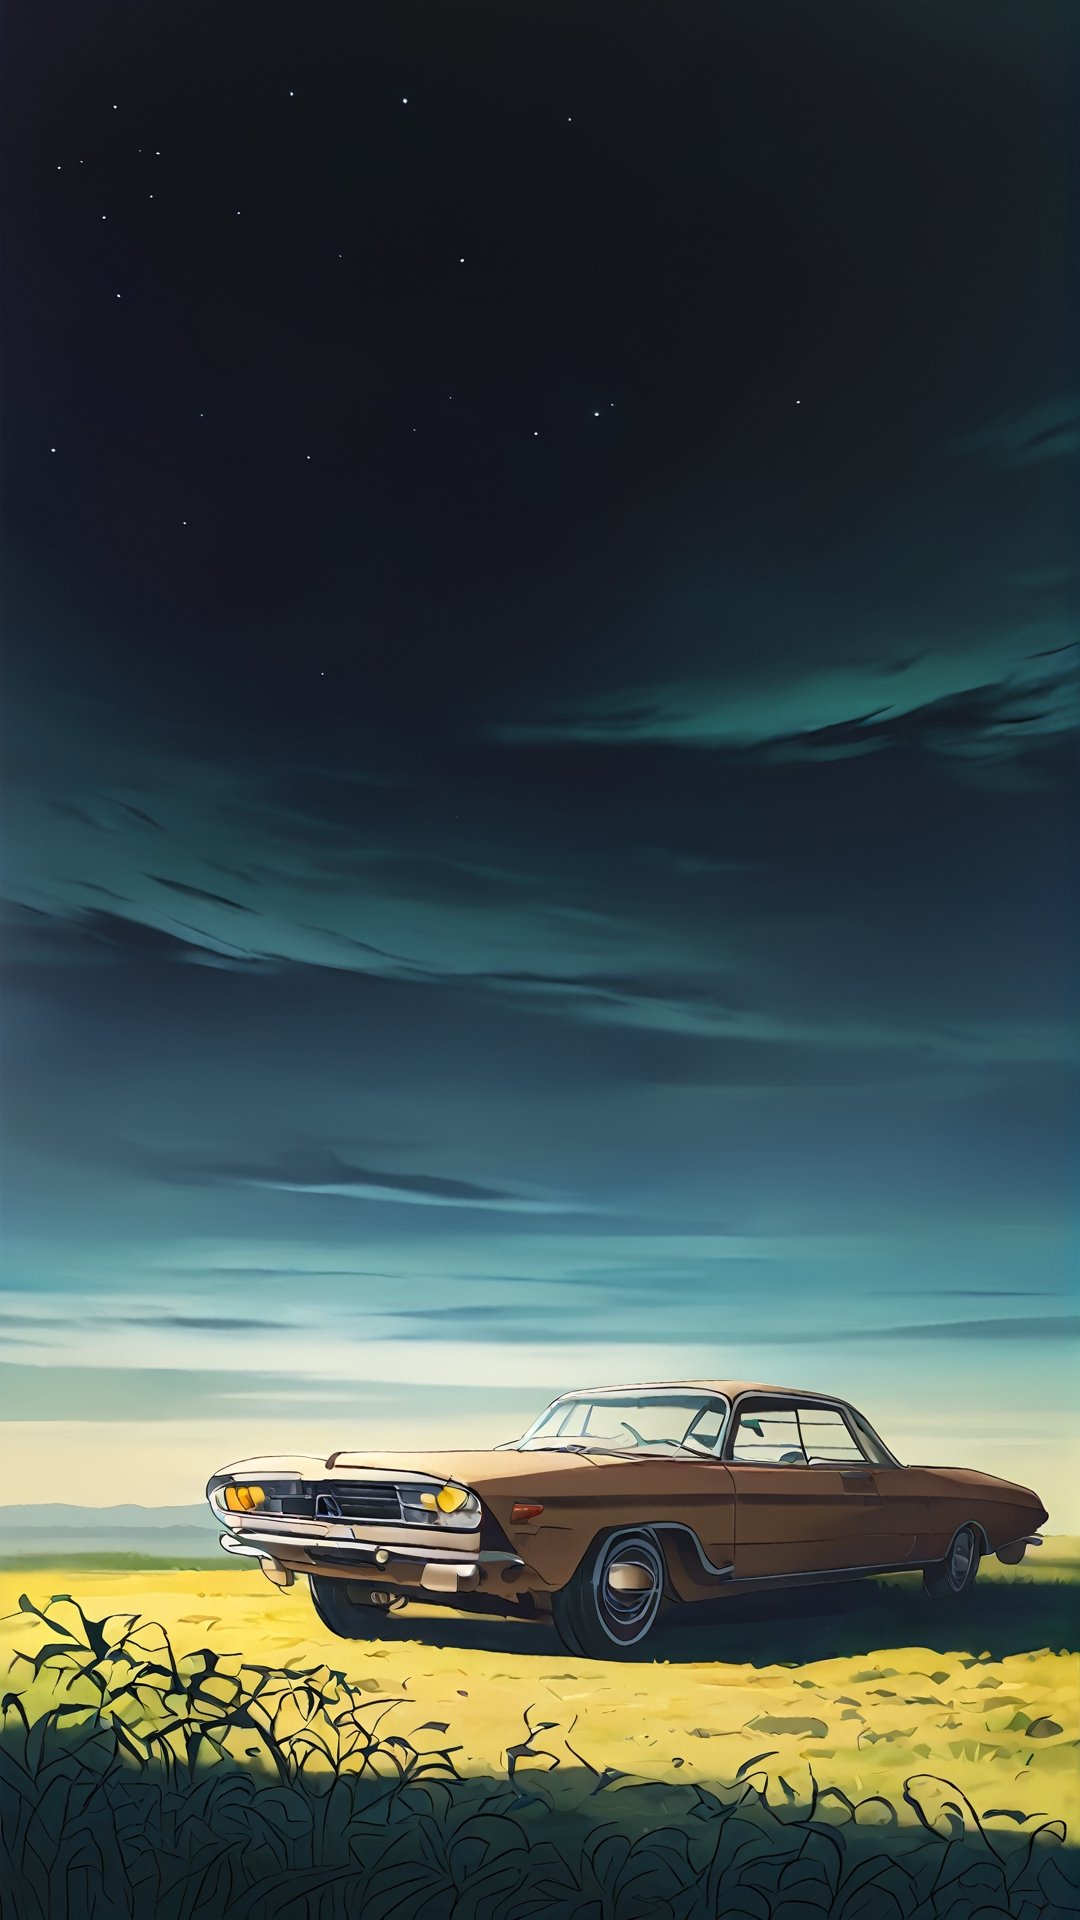 Create a captivating LOFI digital landscape illustration featuring a weathered retro car, LOFI colors, and natural landscapes seamlessly blended. Imagine a scene that evokes a sense of nostalgia, timelessness, and the beauty of nature intertwined with remnants of the past.

Start by depicting a weathered retro car with rusted patches, faded paint, and vintage charm. Place the car in a serene natural setting, such as a peaceful meadow, a tranquil lakeside, or a winding country road surrounded by trees and hills.

Integrate LOFI elements like soft gradients, subtle noise, and muted tones to give the illustration a vintage and analog feel. Use colors that evoke a sense of warmth and tranquility, enhancing the nostalgic atmosphere.

Add details like gentle sunlight filtering through leaves, dappled shadows on the ground, and subtle textures to enhance the LOFI aesthetic. Incorporate elements of nature such as wildflowers, grasses swaying in the breeze, or a distant mountain range to complete the landscape.

Let the overall composition convey a story of the passage of time, the beauty of decay, and the enduring allure of nature, inviting viewers to reflect on the connections between the past, present, and the ever-changing landscapes of life.